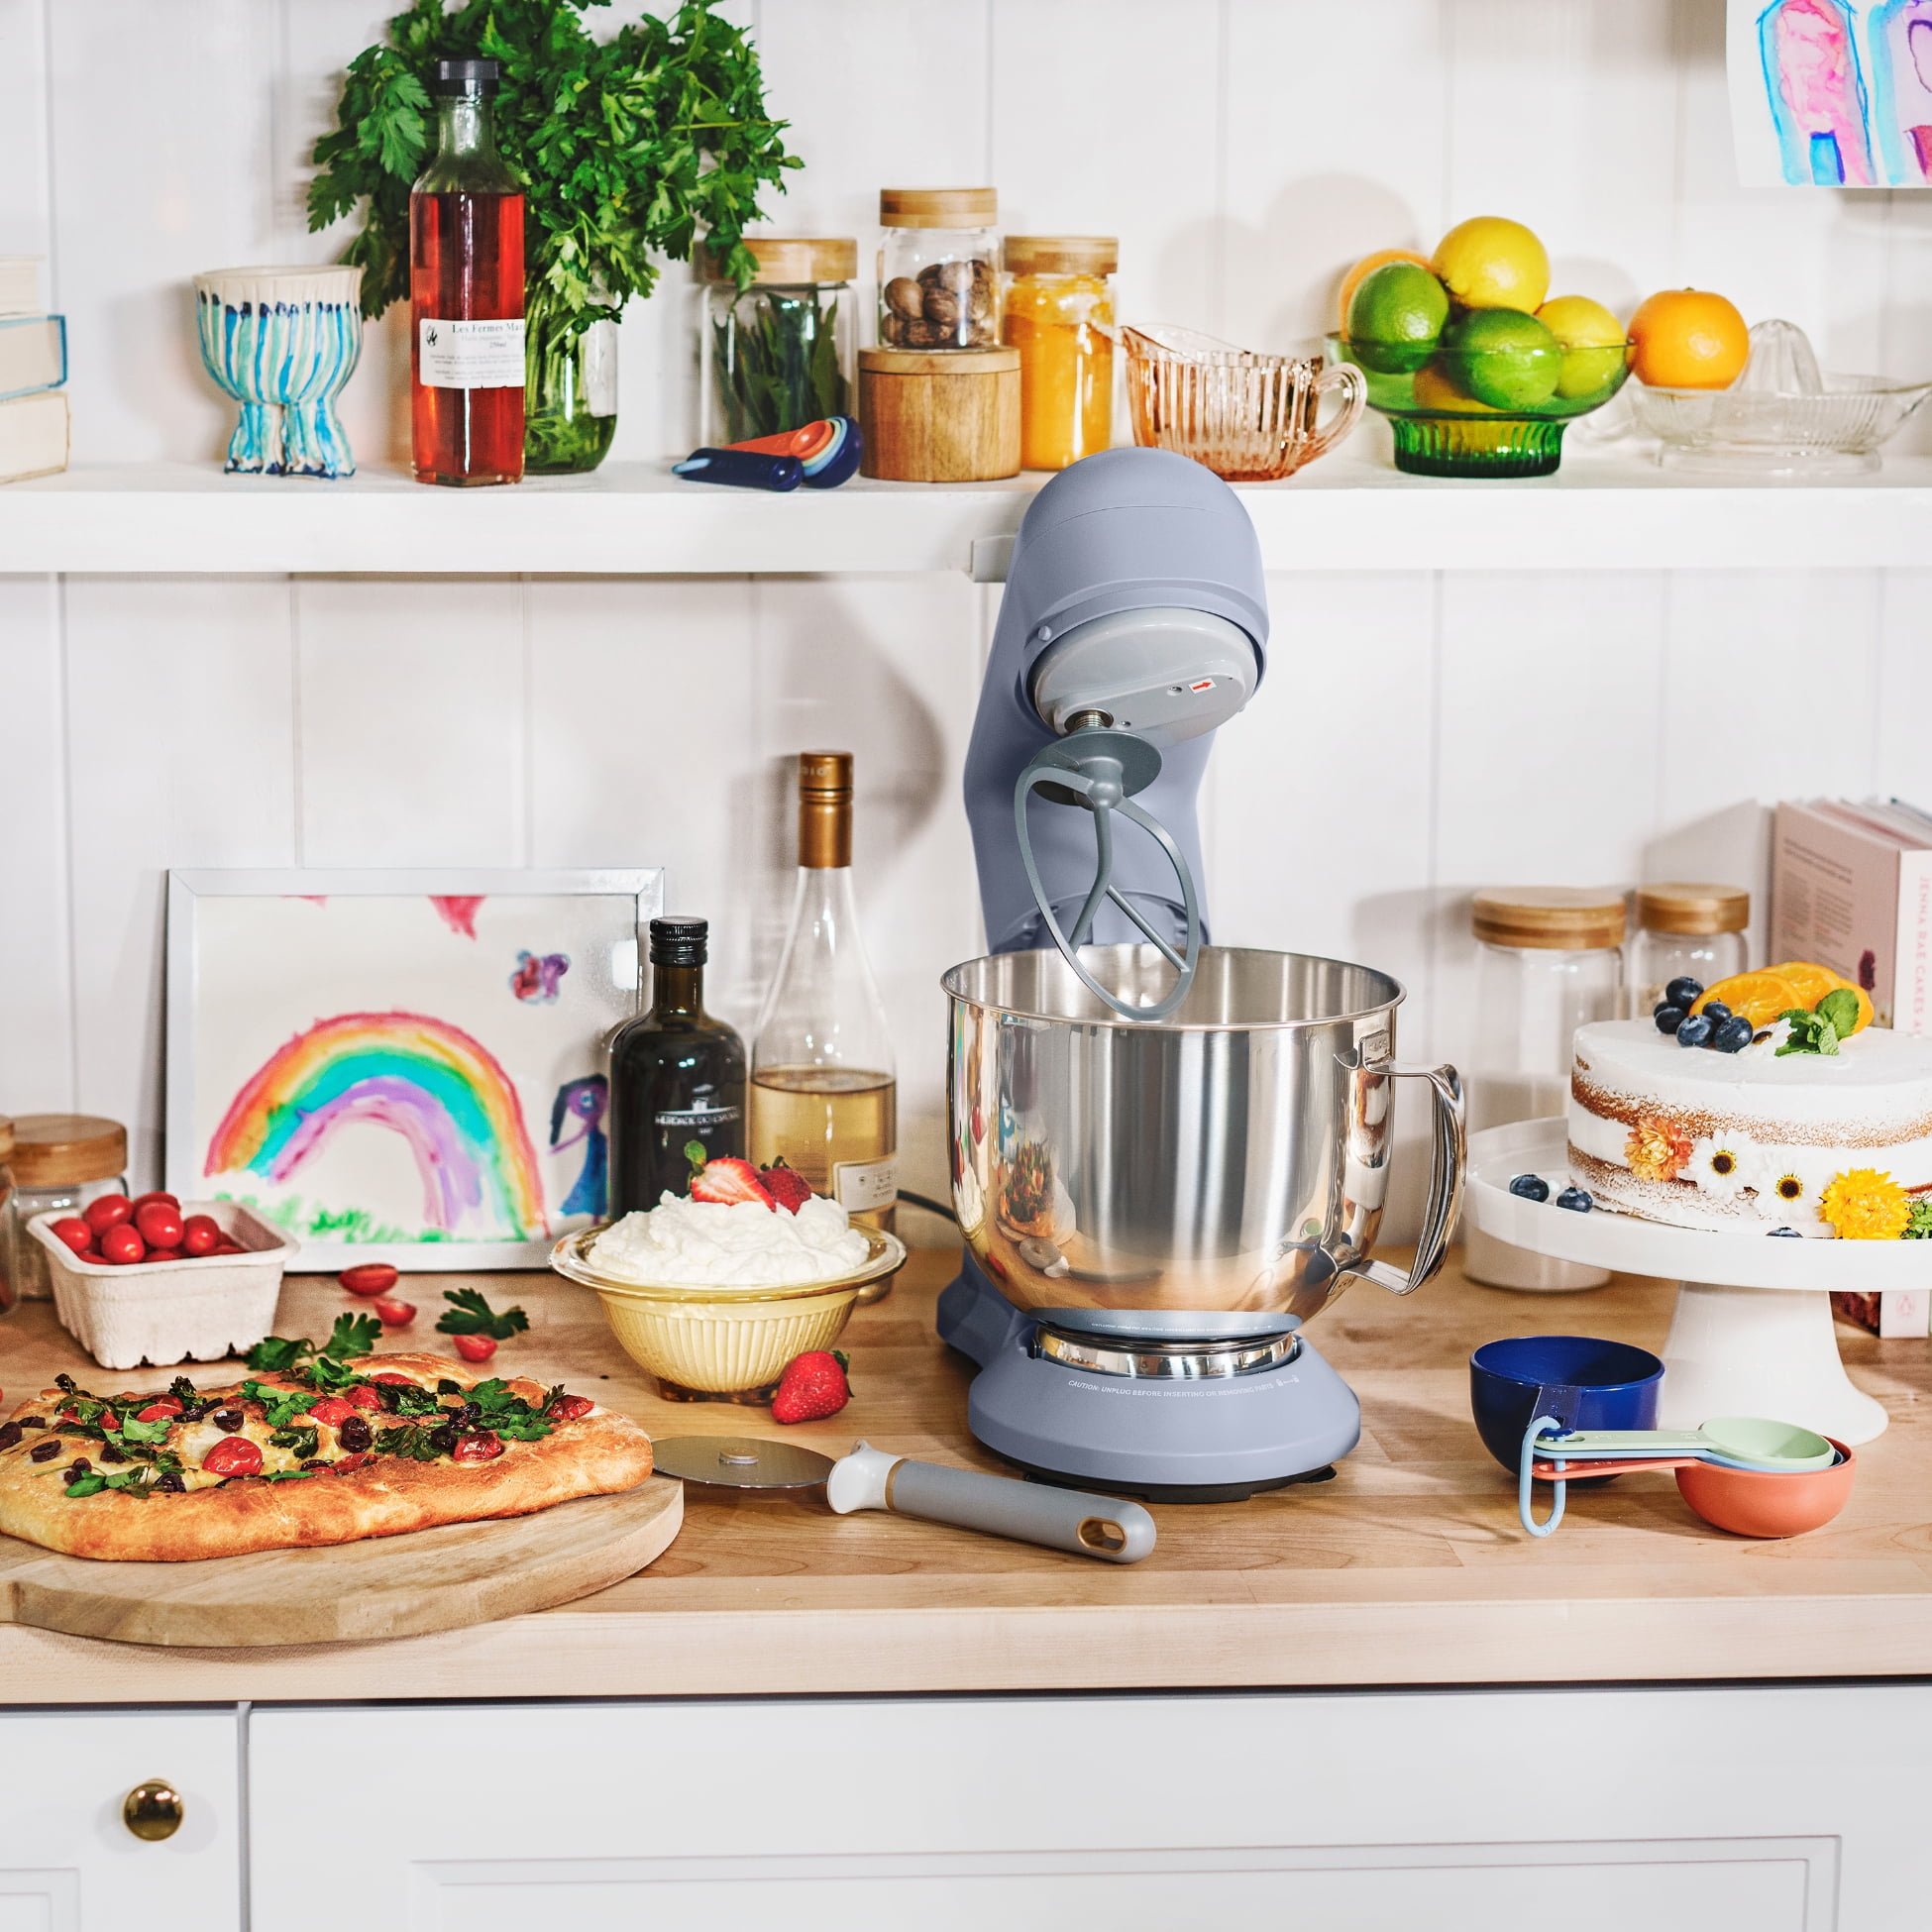 Drew Barrymore's Walmart line debuts a stylish stand mixer